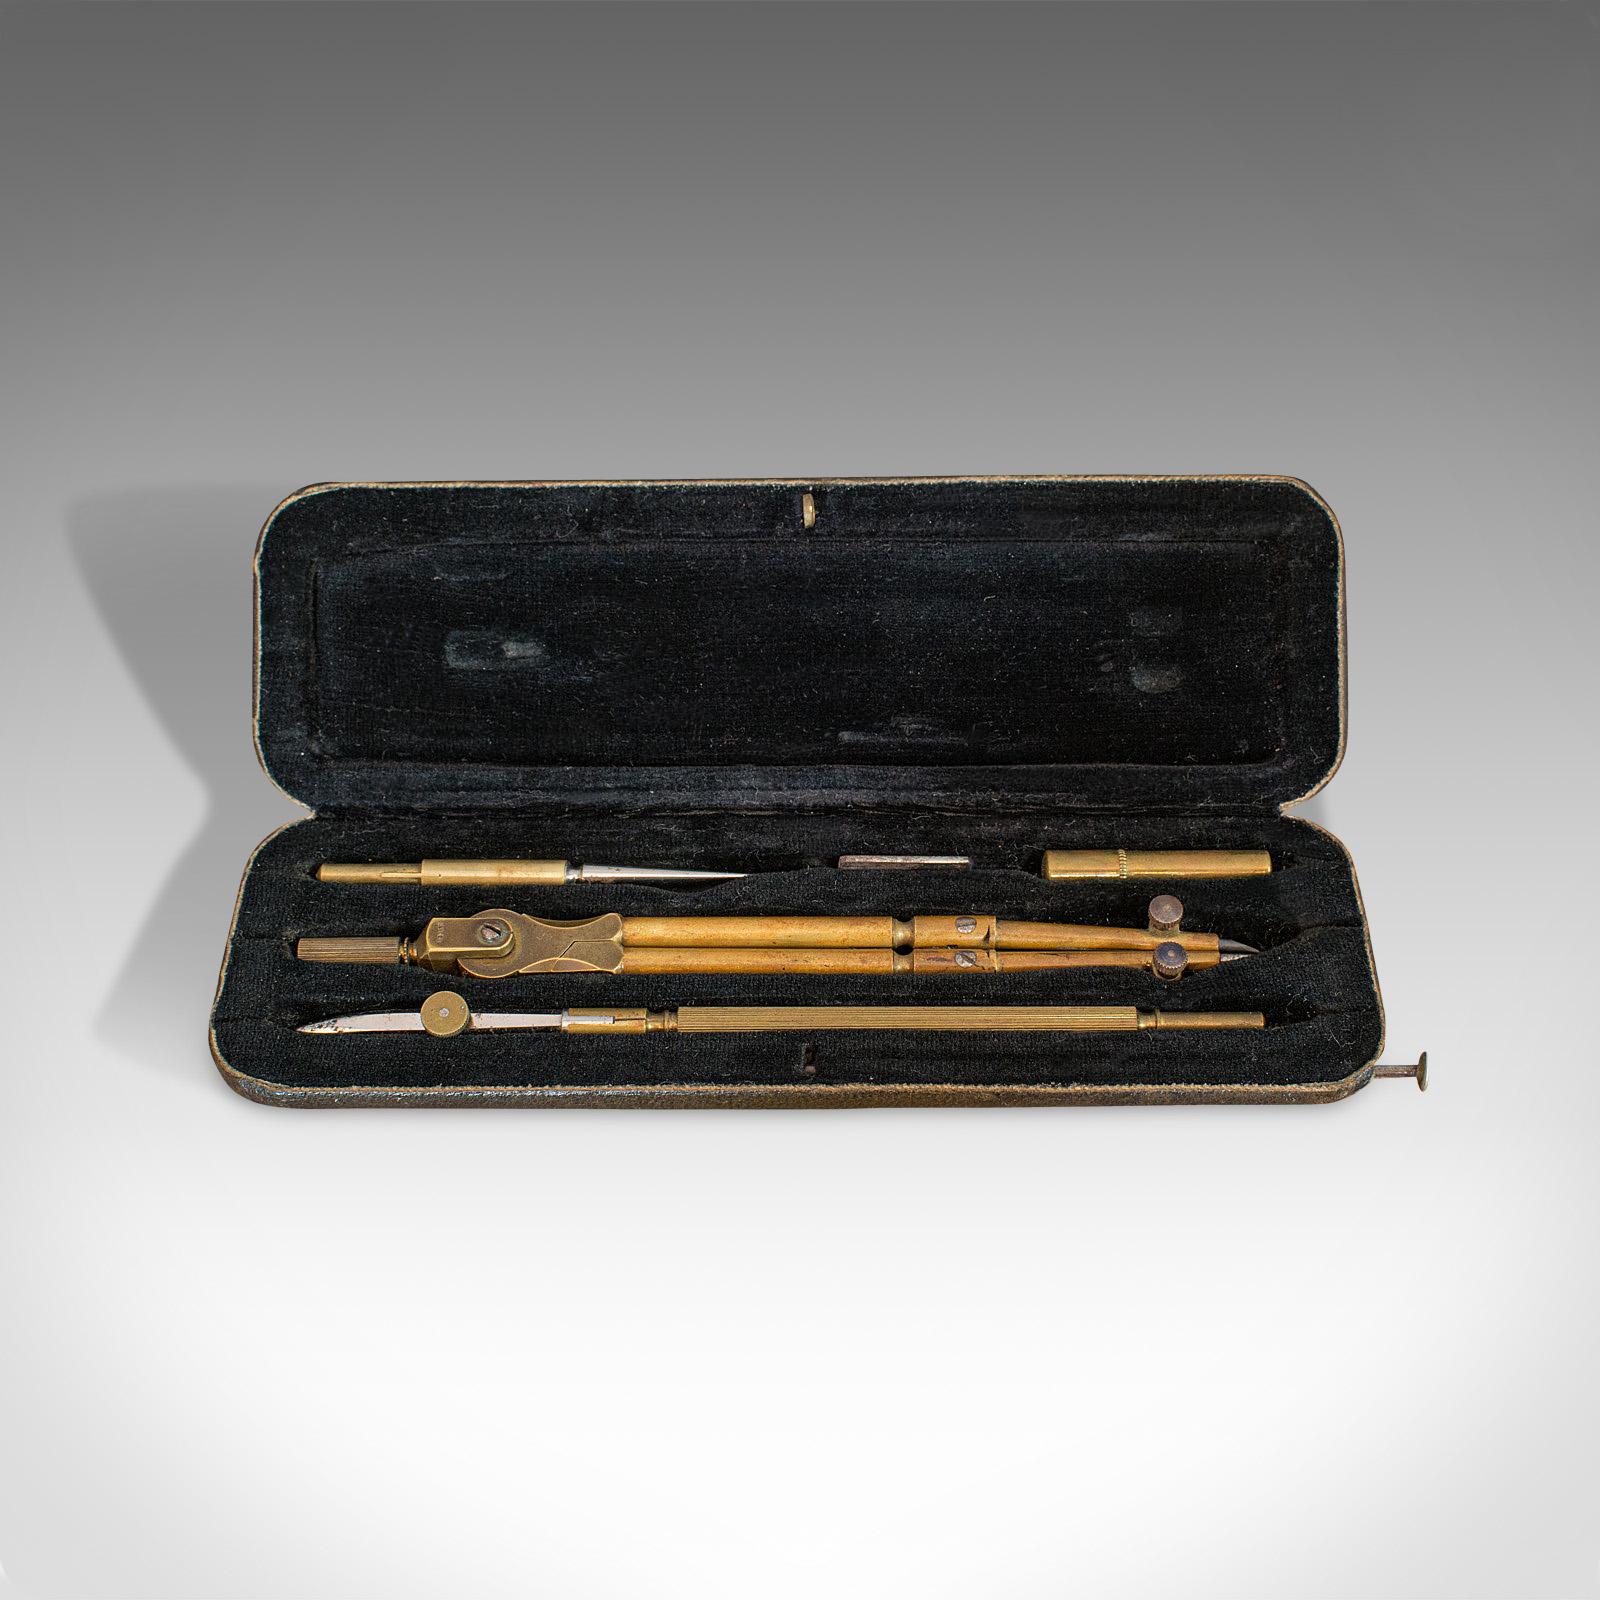 This is a small antique cartographer's tool set. A German, brass draughtsmen's instrument case by Riefler, dating to the late 19th century, circa 1900.

Wonderfully compact set for the travelling cartographer
Displays a desirable aged